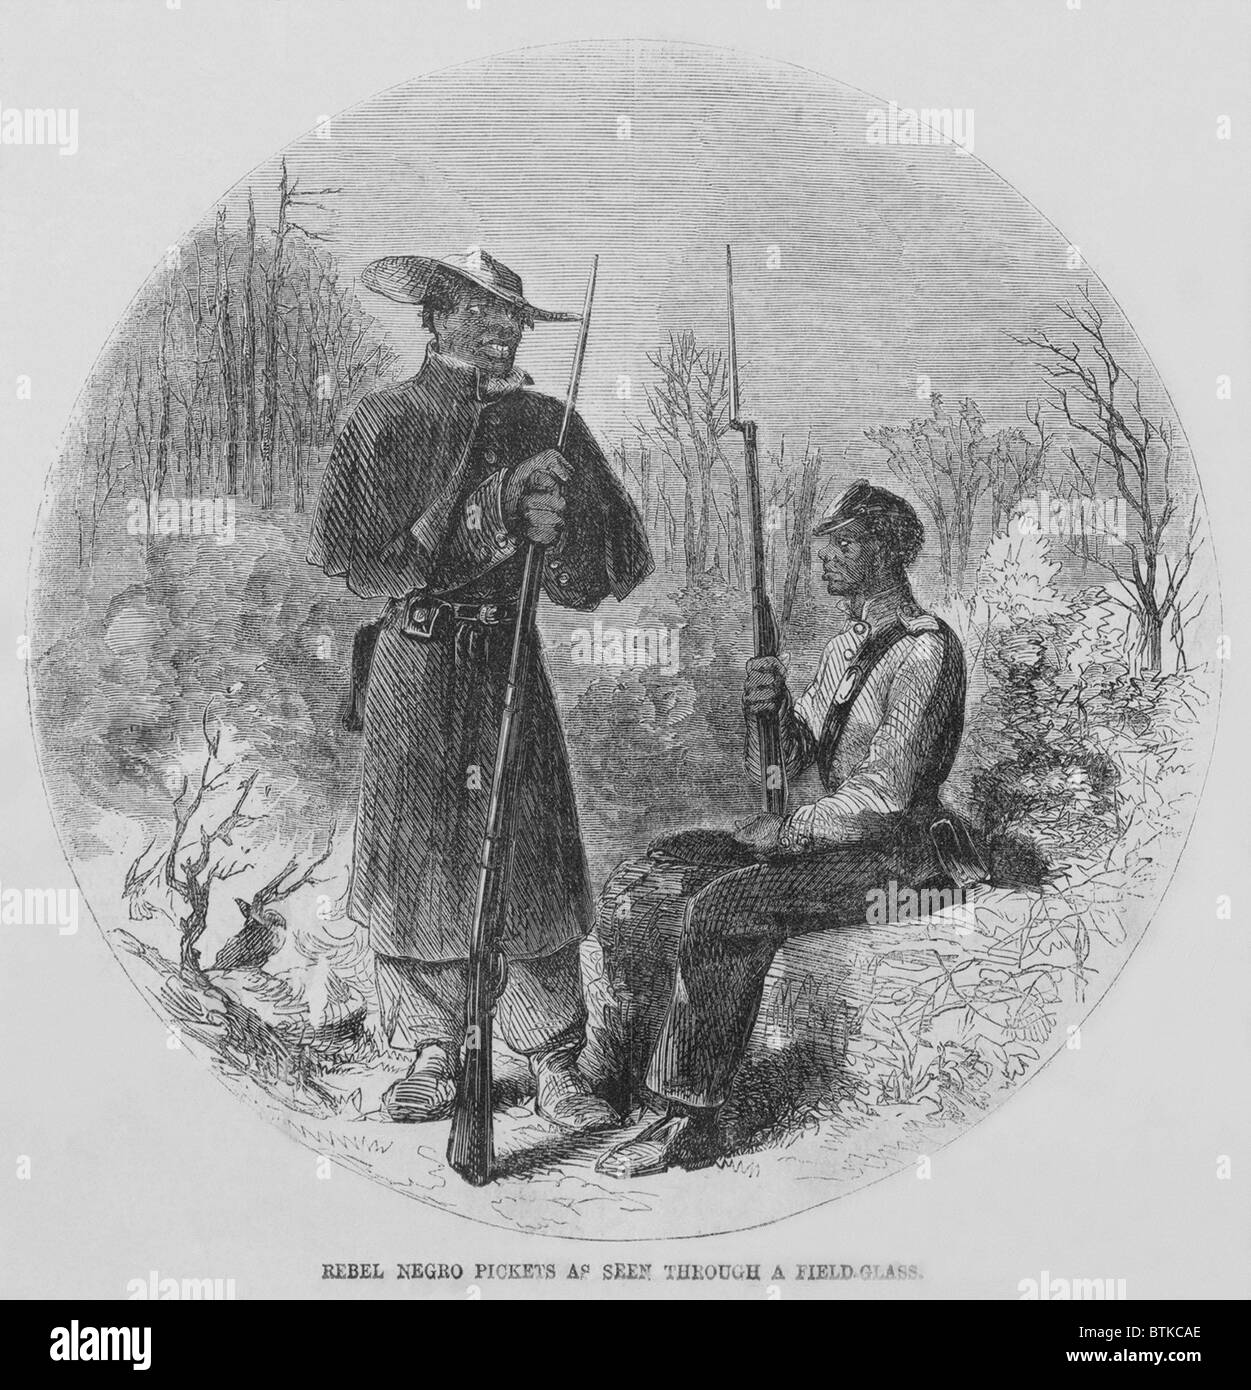 Fully armed Confederate African American pickets as seen through a Union officer's field-glass, while on outpost duty at Fredericksburg. Pickets were soldiers placed in a forward of a position to warn against an enemy advance. January 1863, from drawing by Theodore R. Davis. Stock Photo